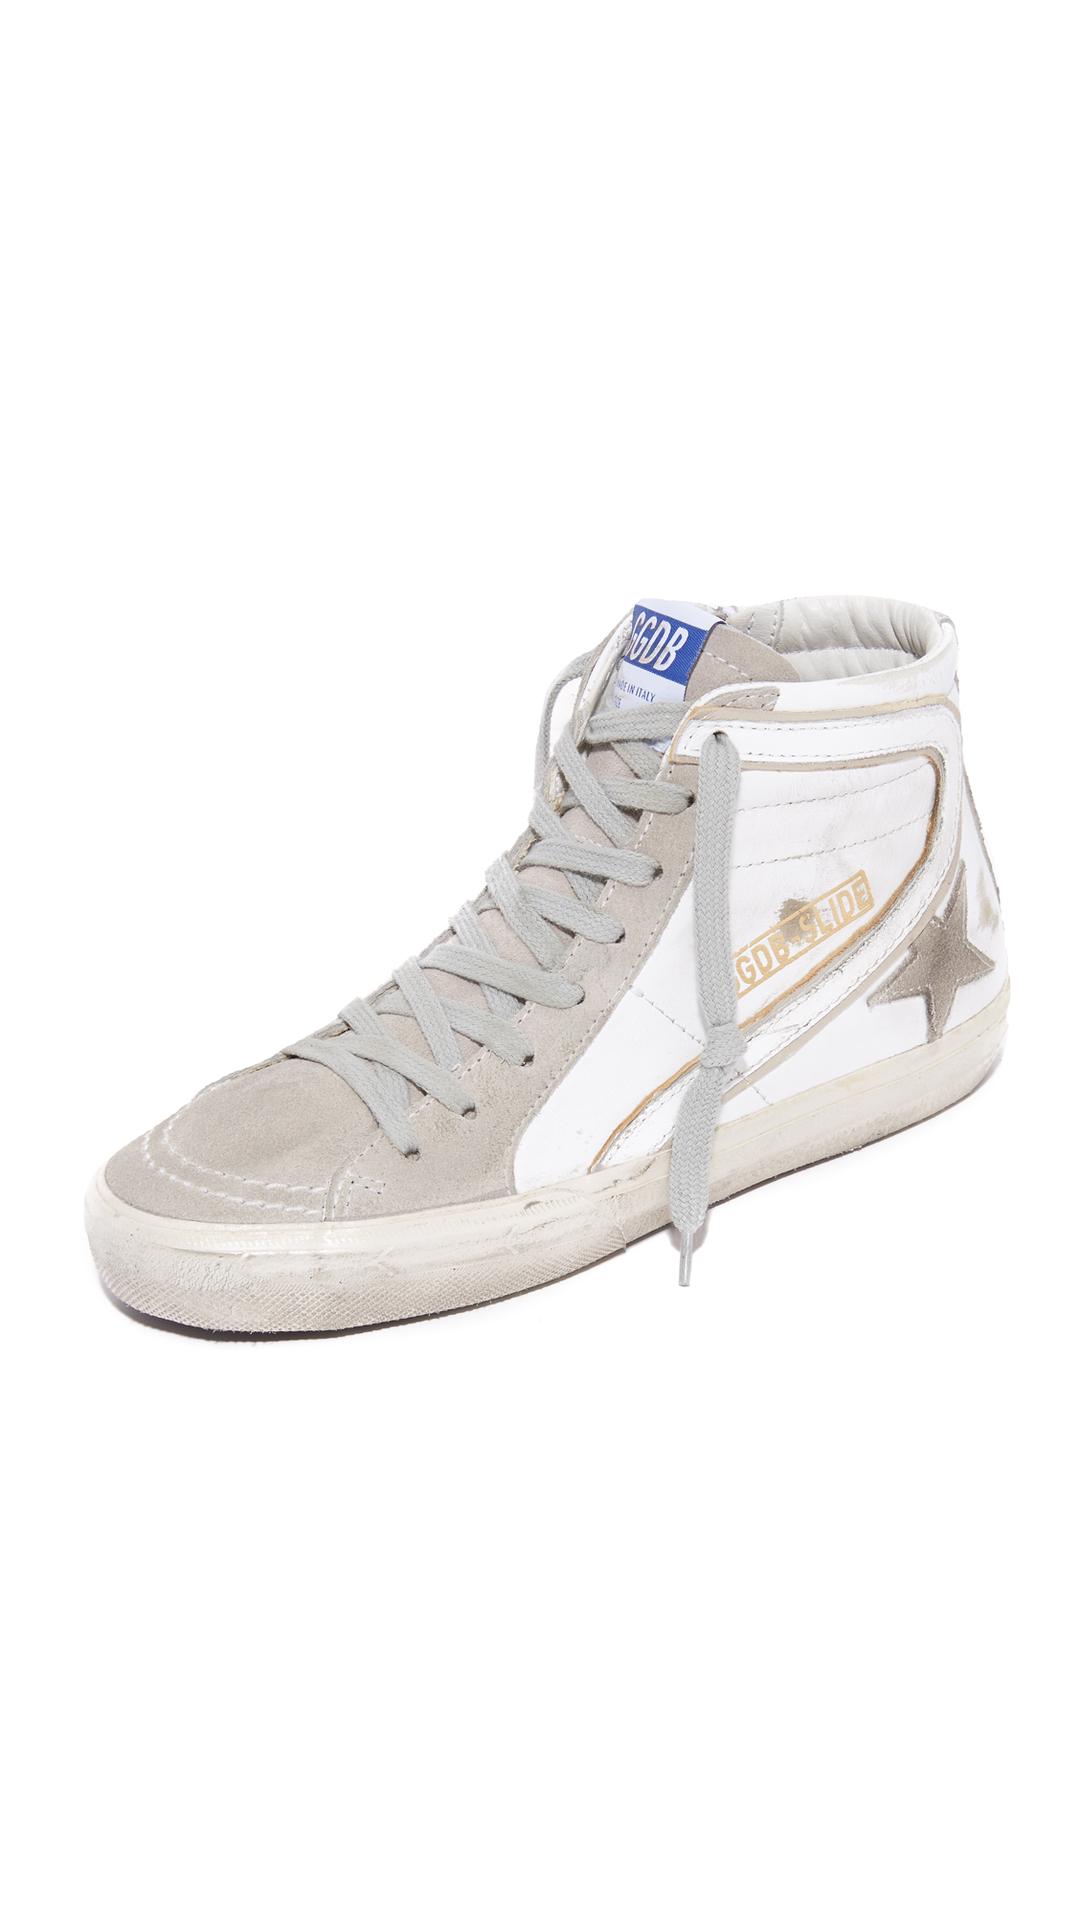 15 High-Top Sneakers to Add to Your Shoe Collection | Who What Wear